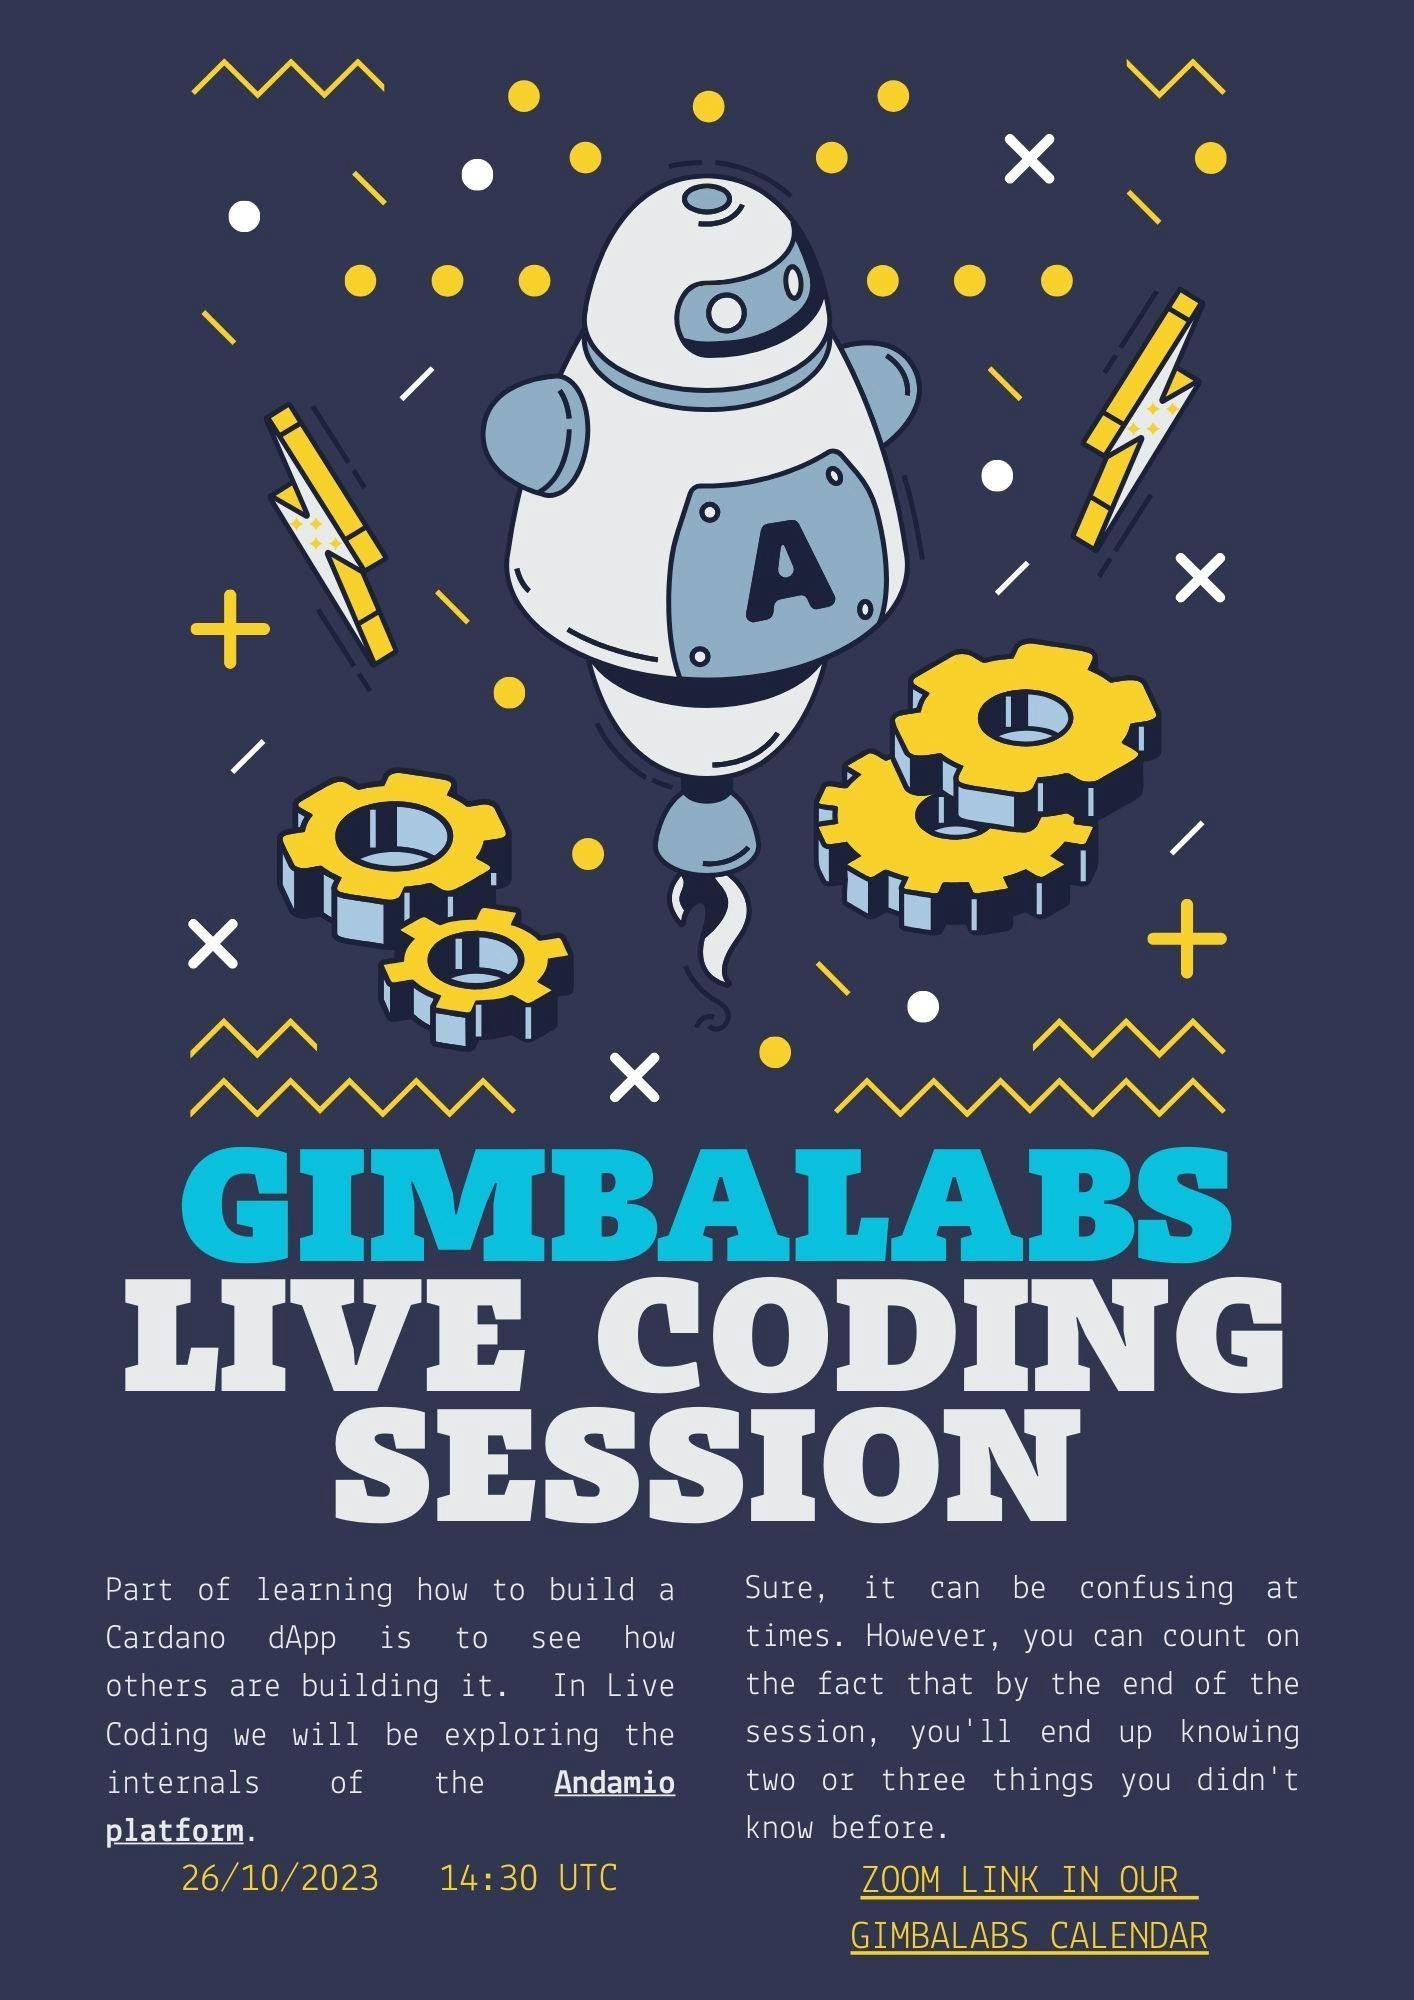 Gimbalabs Live Coding session, brought to you by: Andamio platform